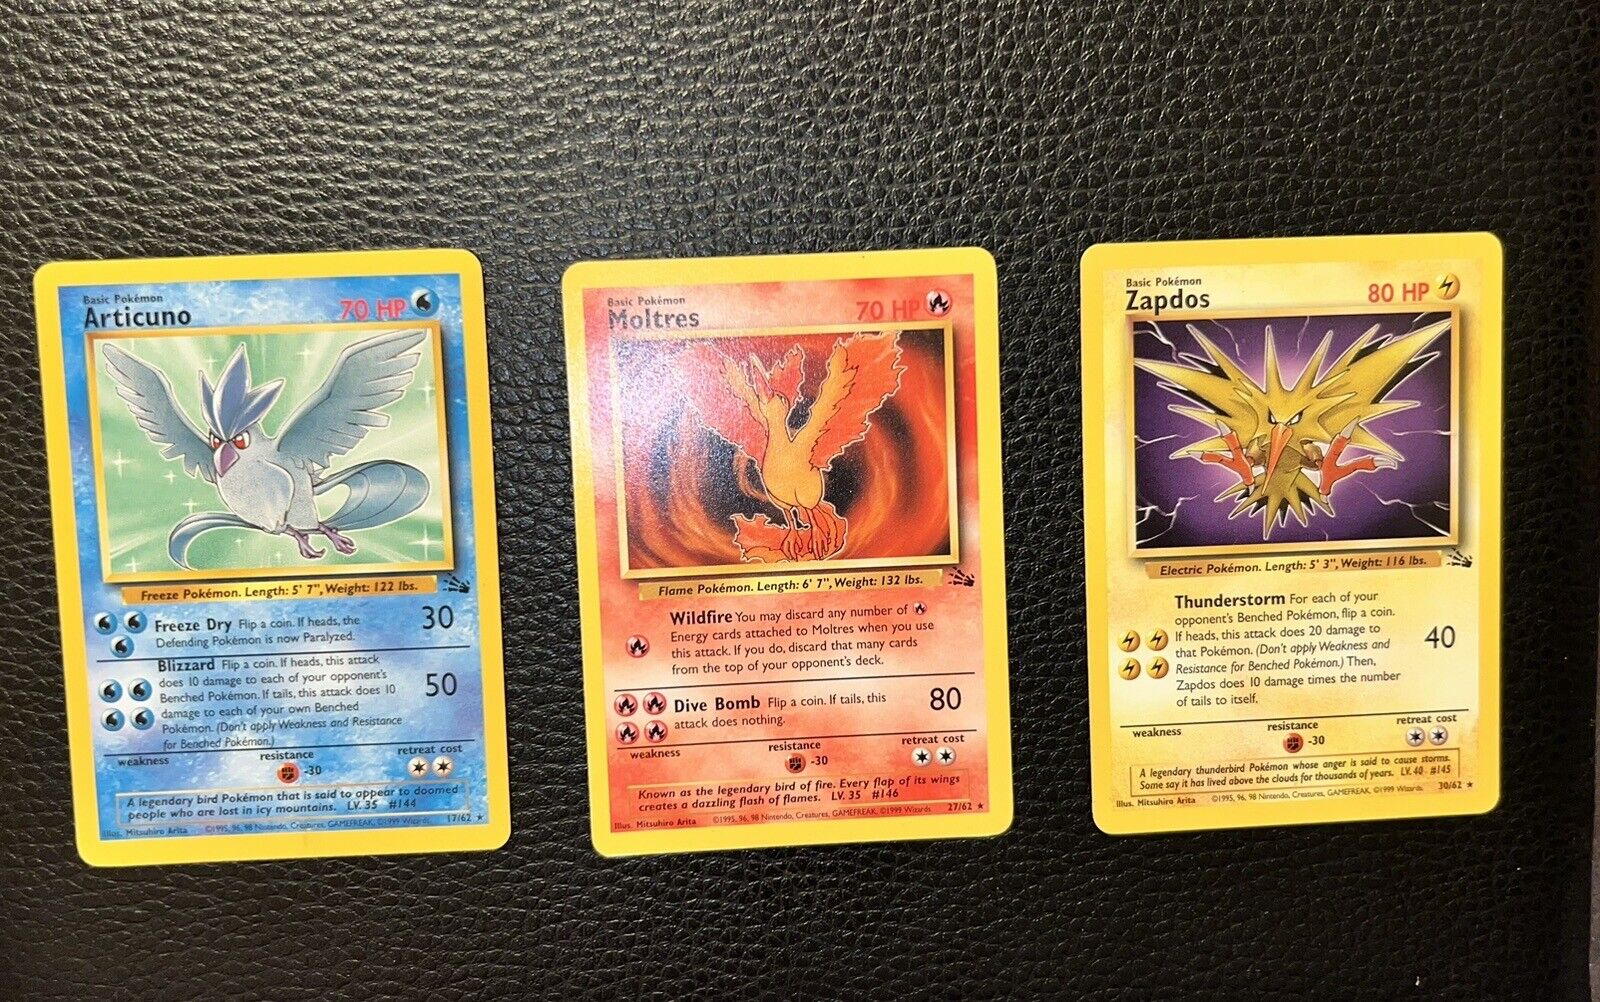 Pokémon TCG Unlimited Fossil Set. 3 Cards - Zapdos ,Articuno & Moltres. MINT/NM